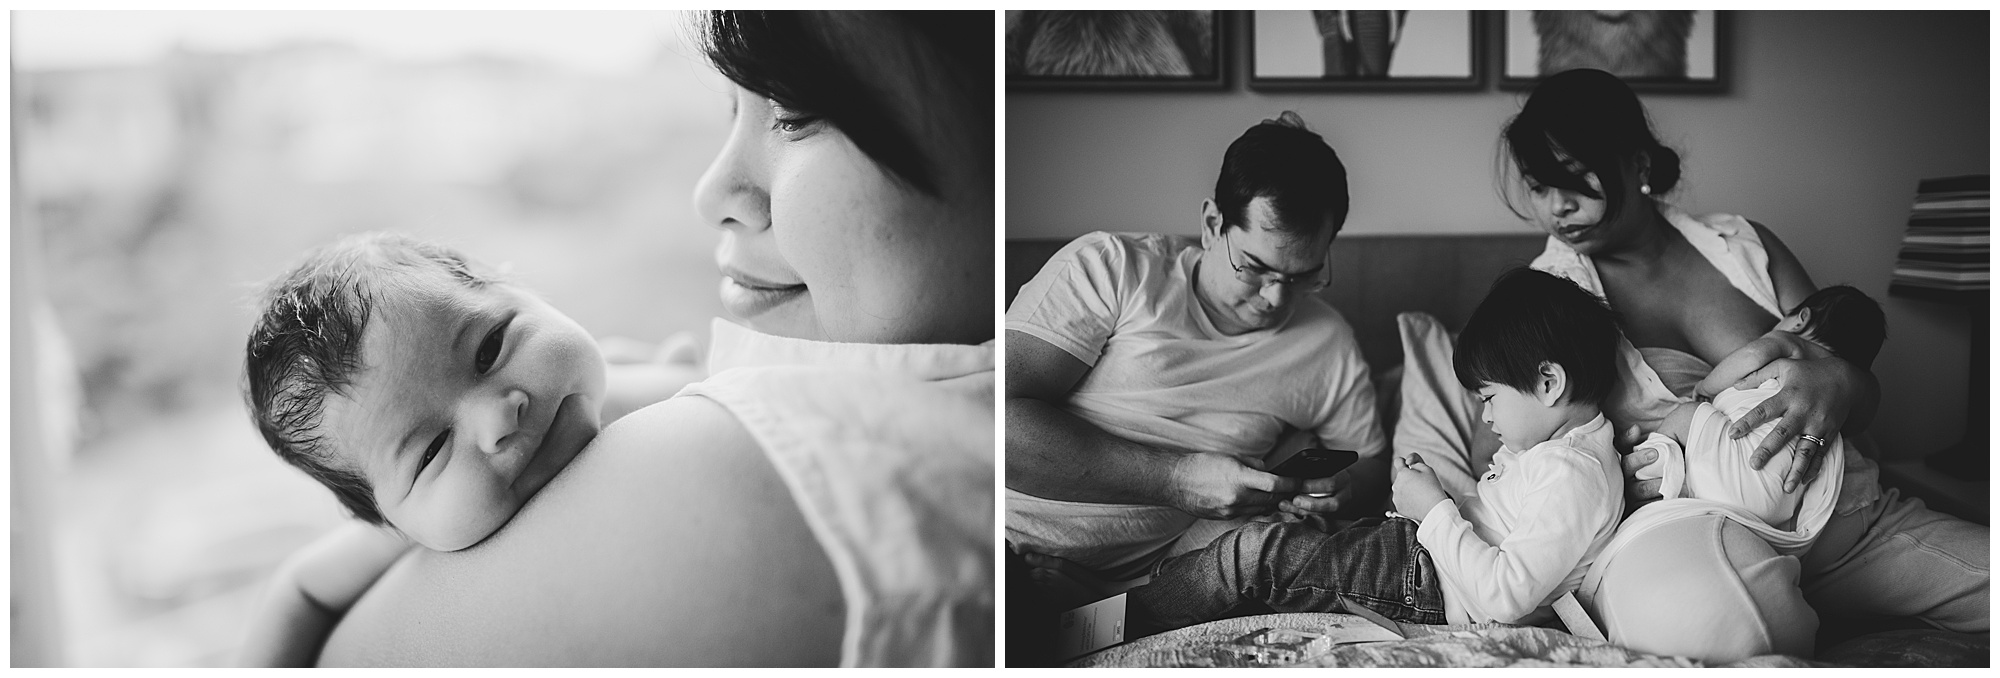 Black and White images of newborn baby boy and family Emily Ann Photography Seattle Photographer Indoor Newborn Photoshoot